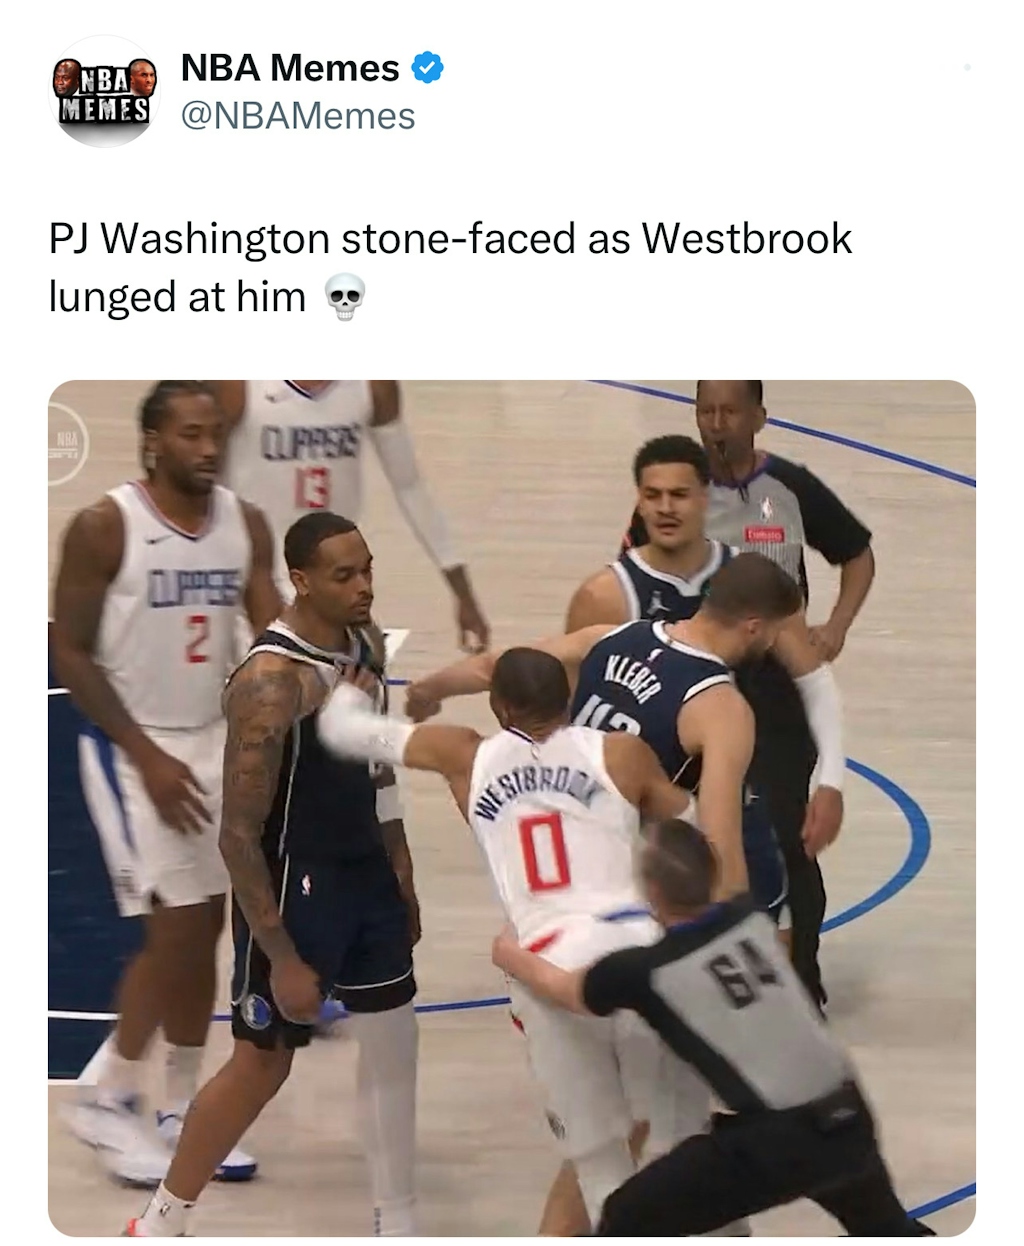 PJ Washington was ready for that action 😂